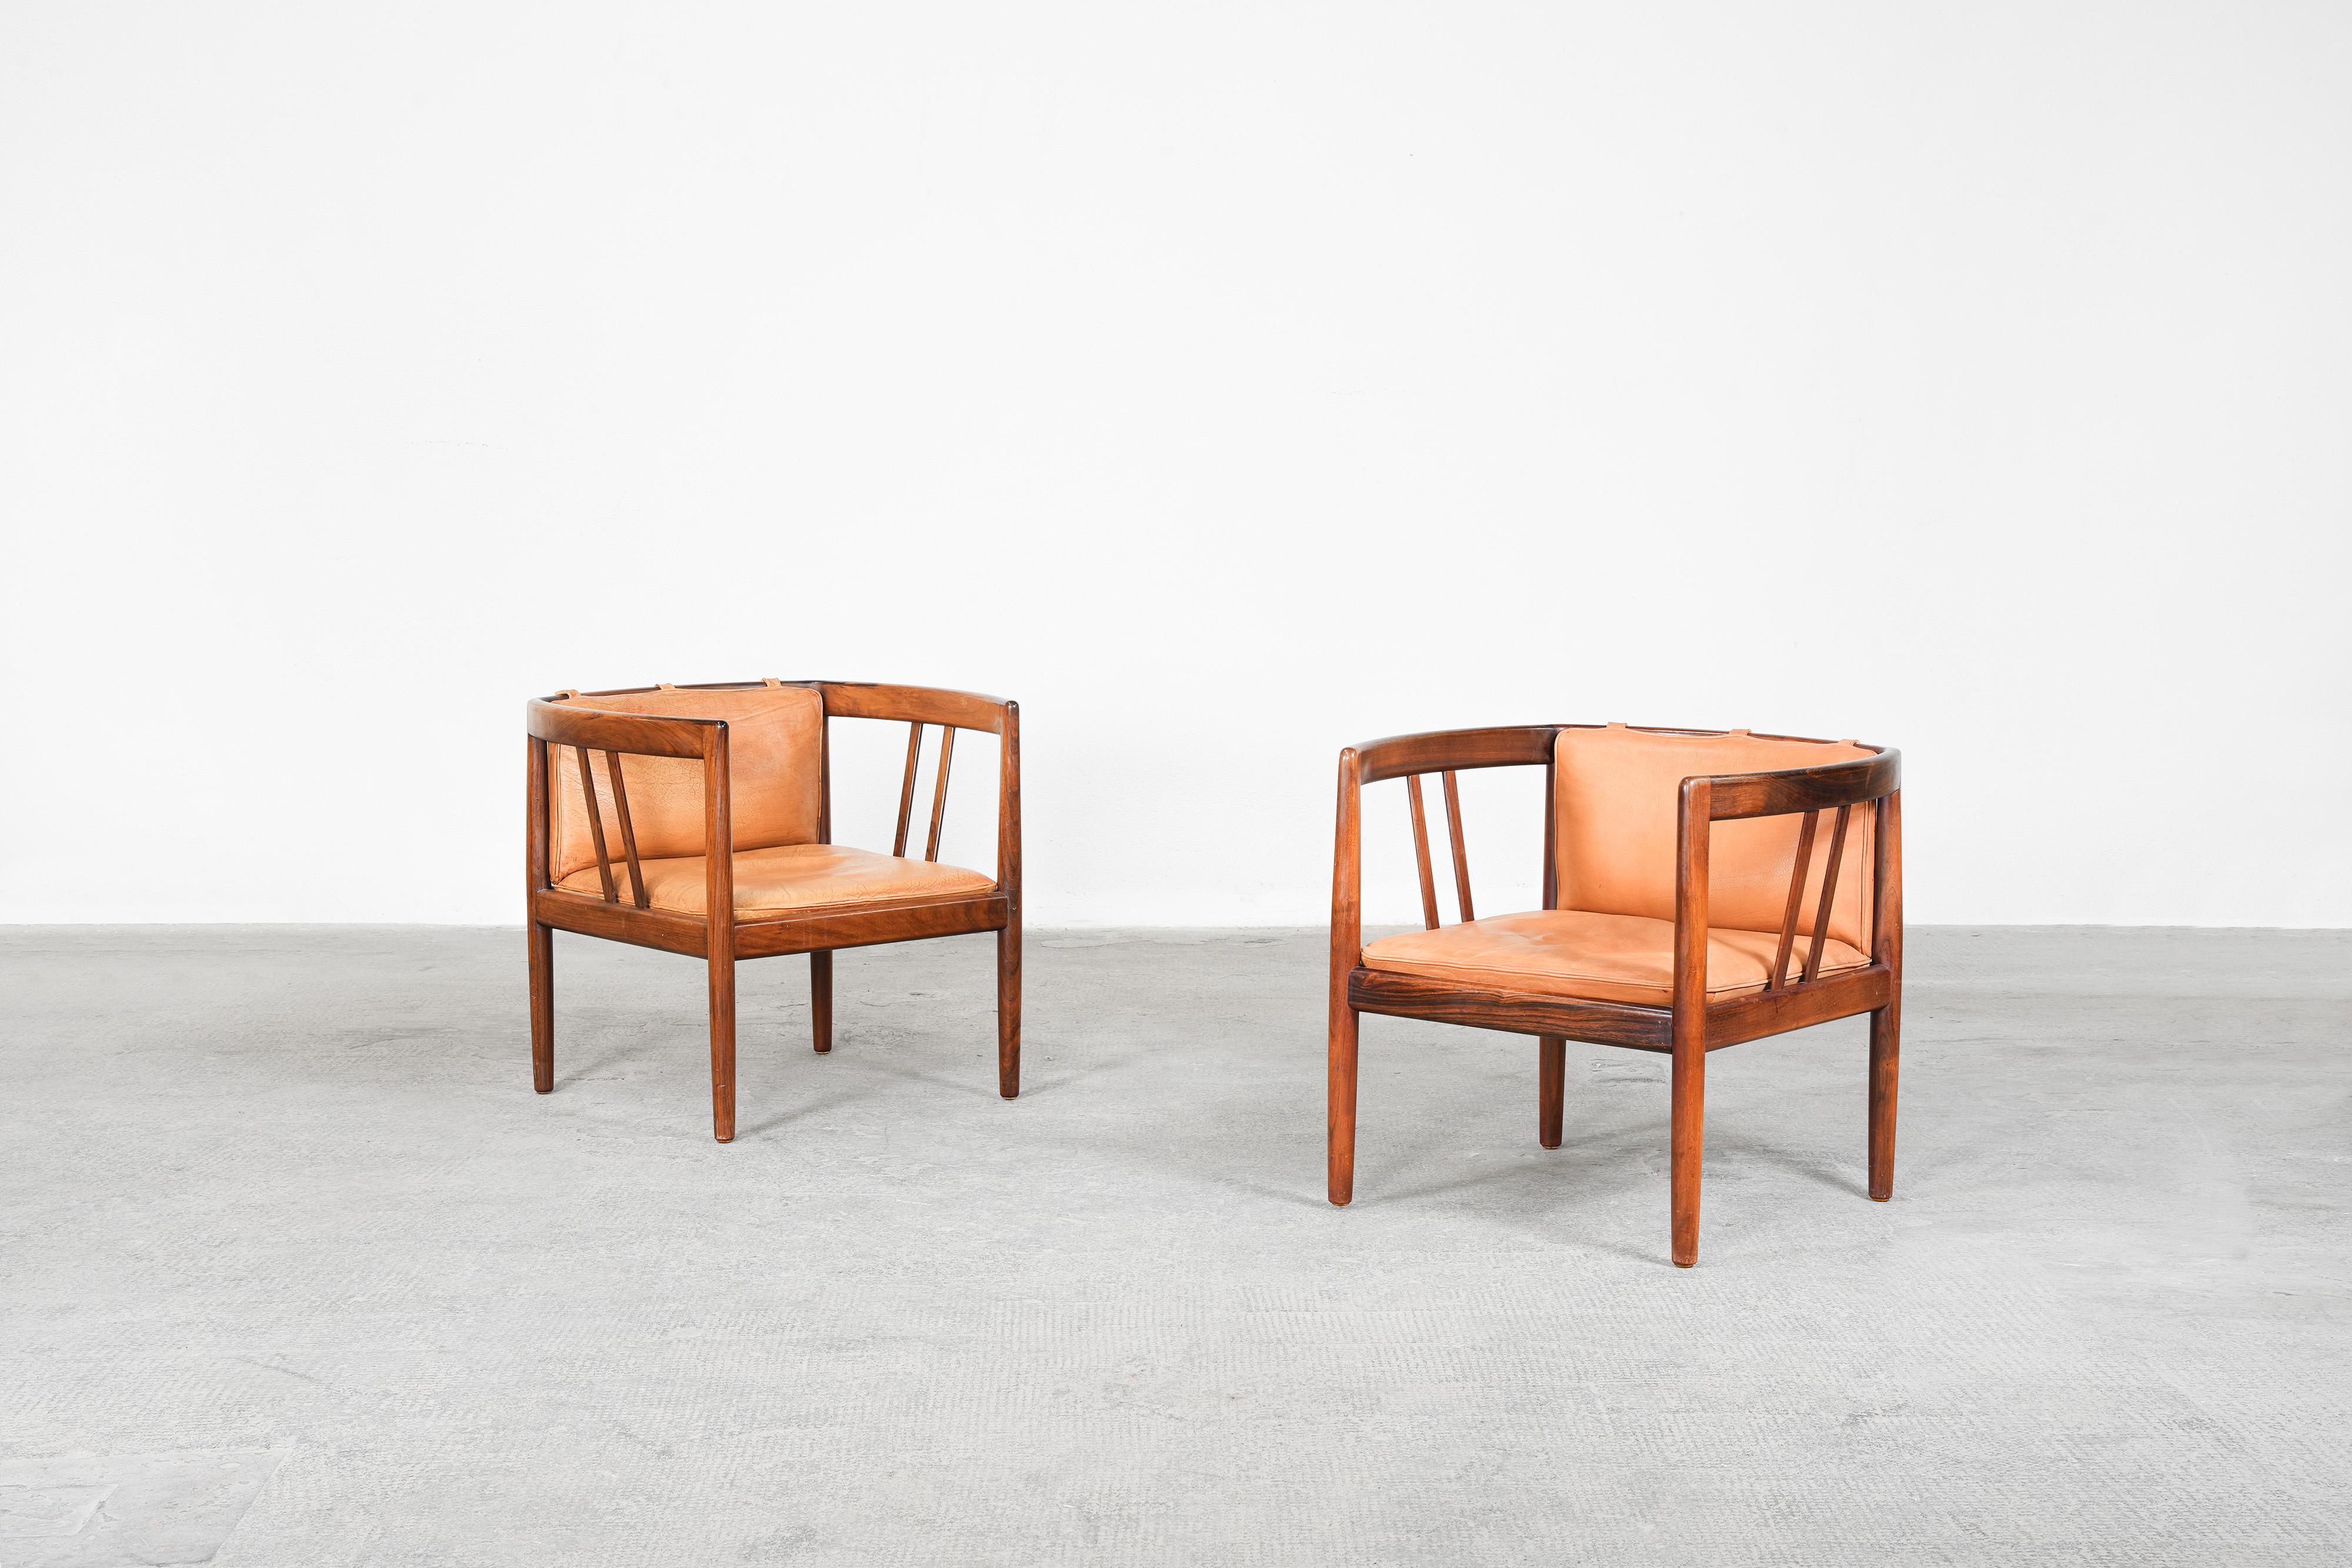 A beautiful rare pair of lounge chairs, designed by Illum Wikkelsø and manufactured by Holger Christiansen in the 1960ies.
Both chairs are in very good original condition with just little signs of usage. Both come with brown buffalo-leather